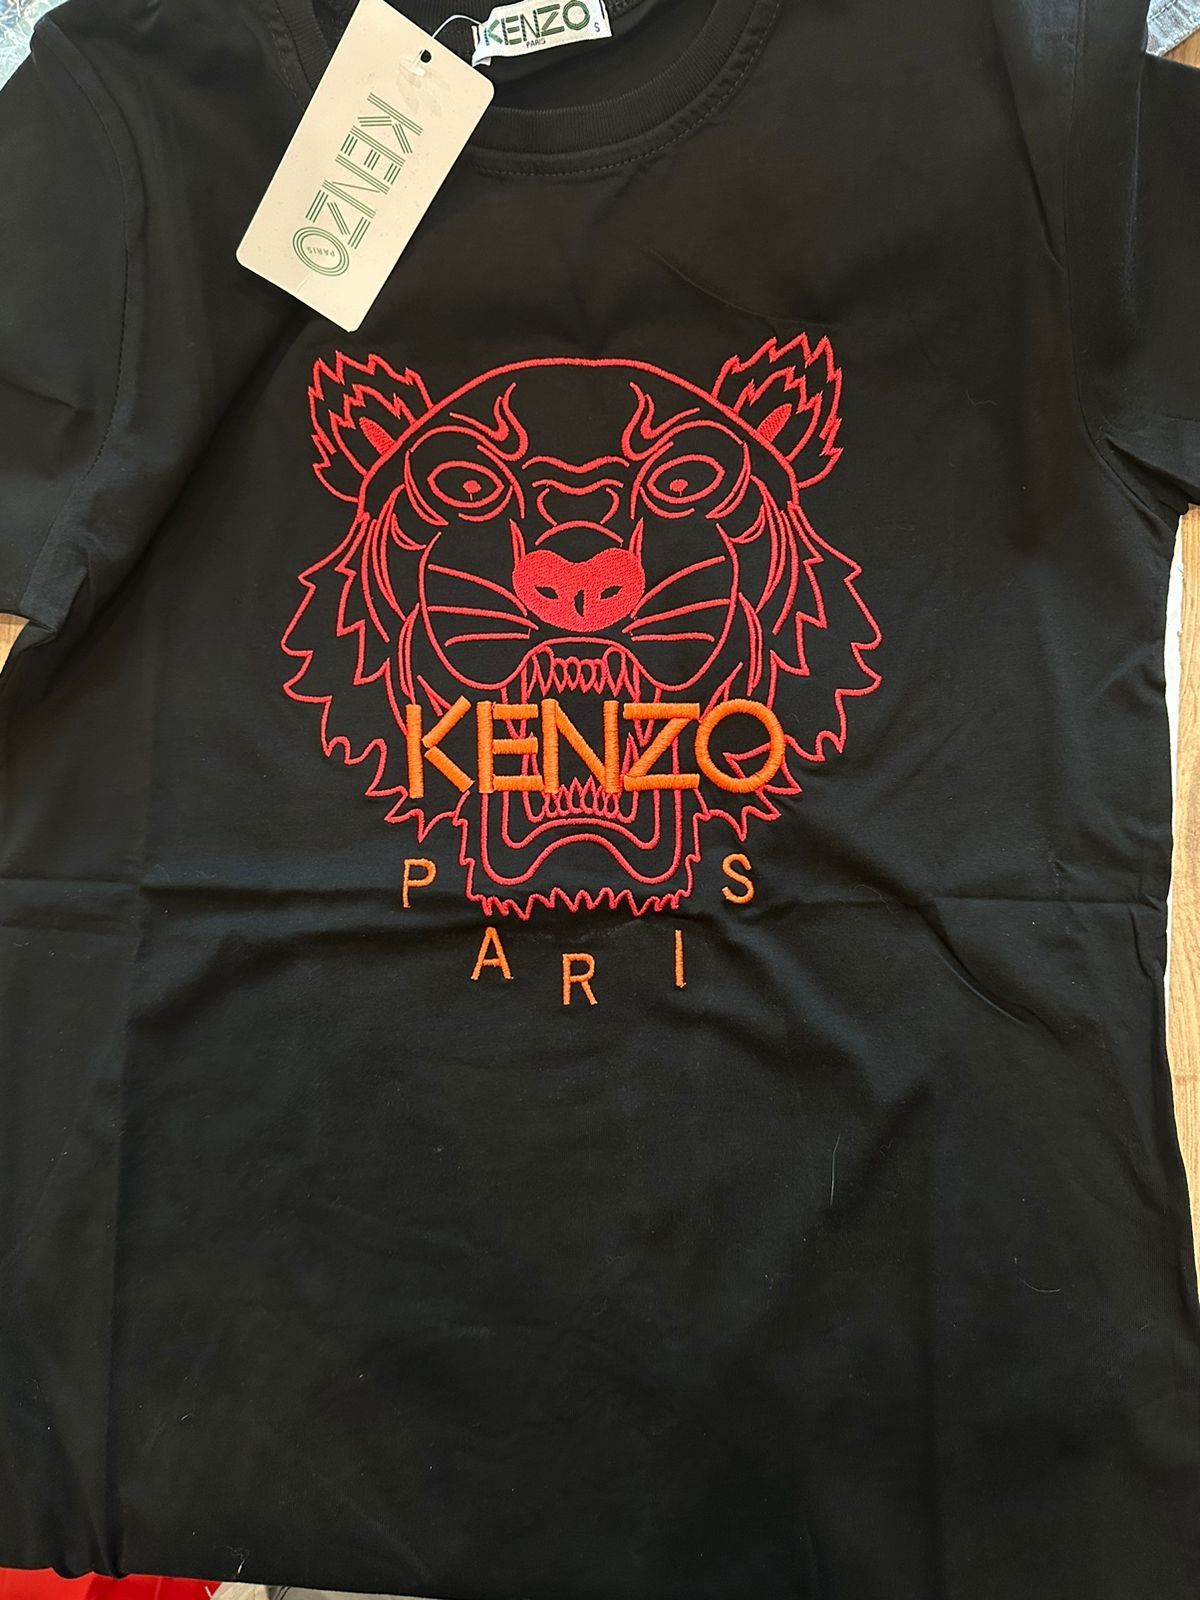 The Nord Face M,L,Kenzo.
Kenzo - S, XL